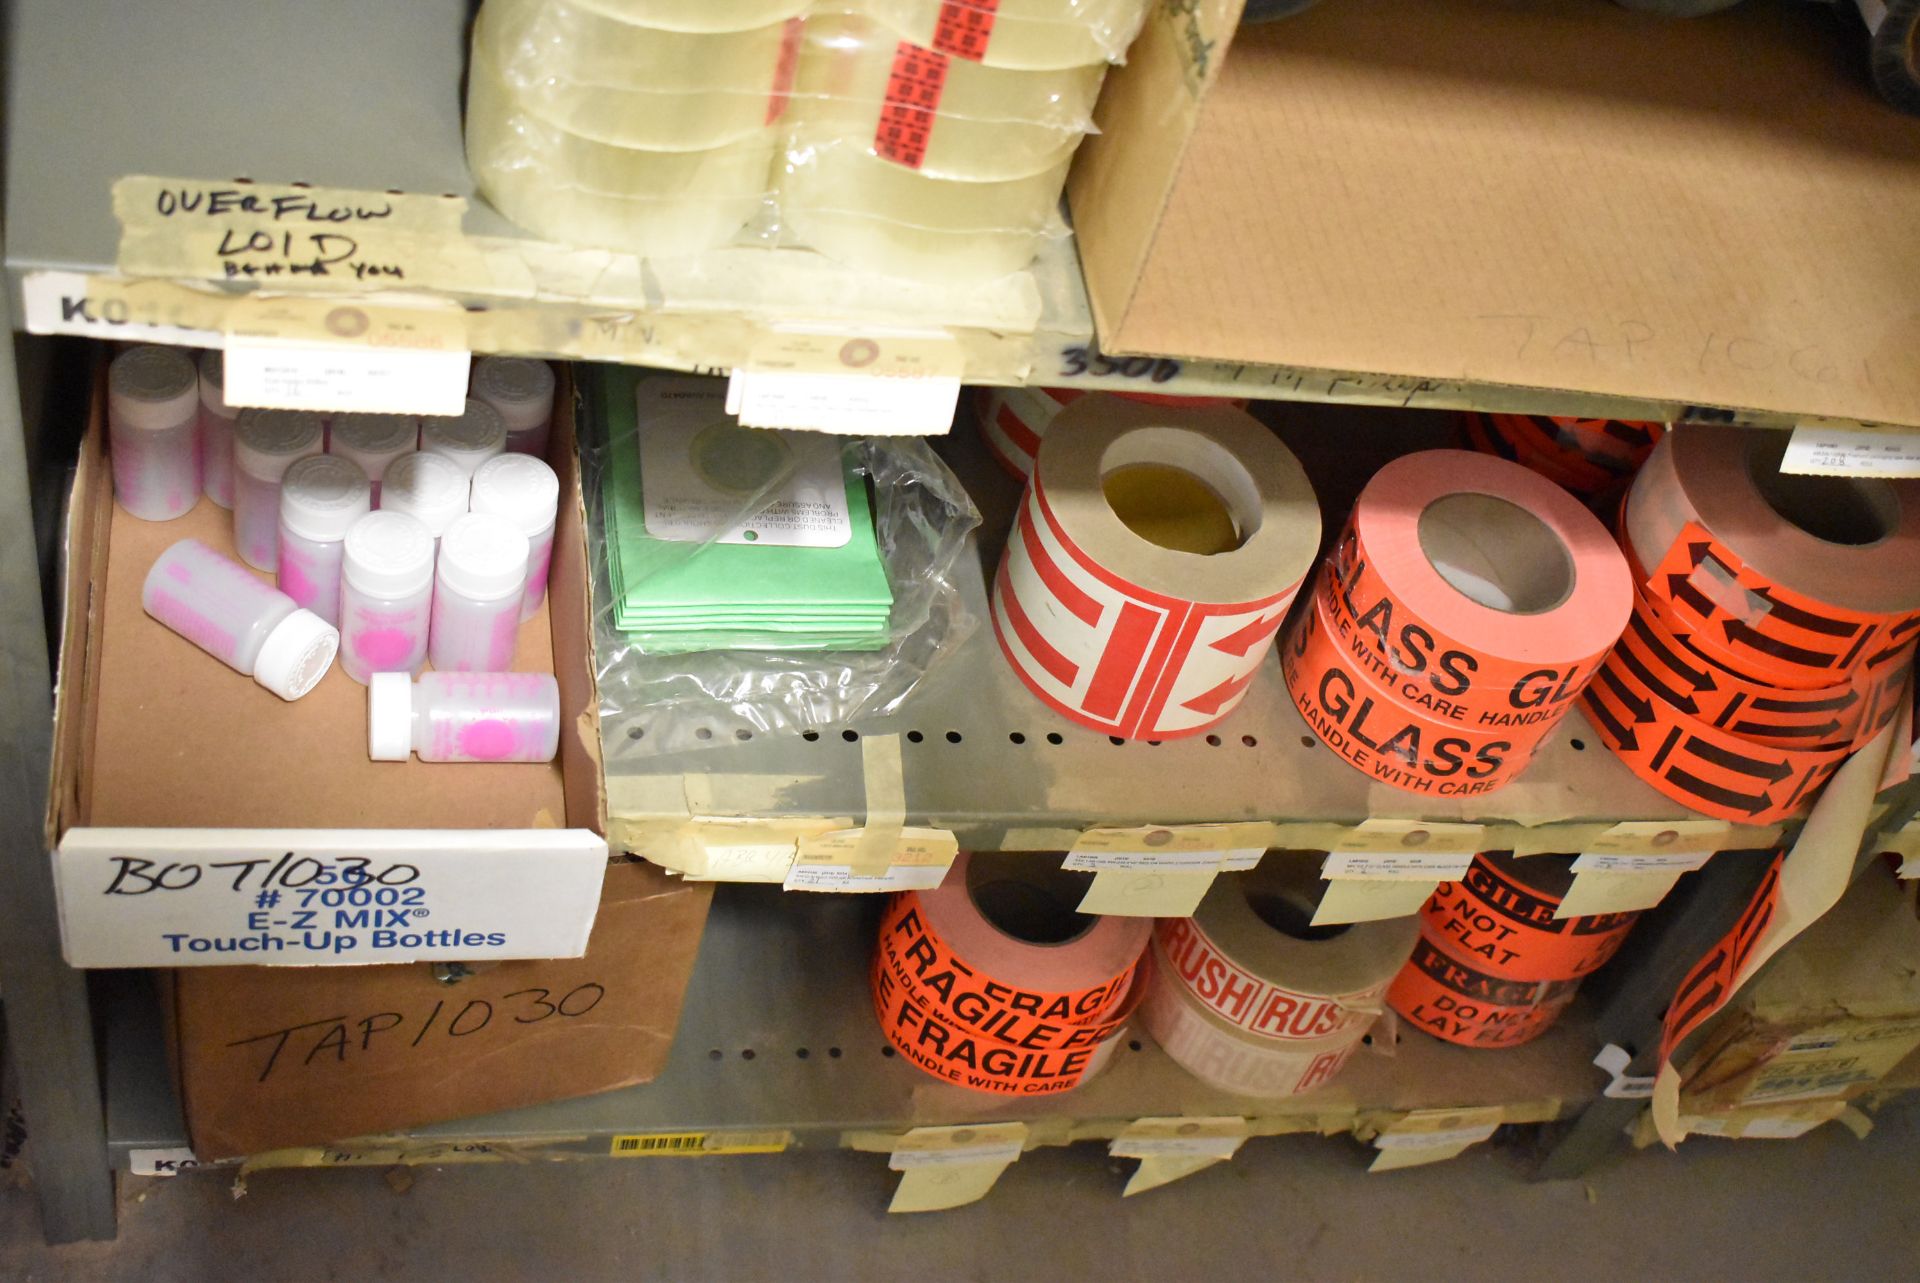 LOT/ CONTENTS OF SHELVES - INCLUDING SHOP SUPPLIES, TAPE, PAINTERS TAPE, CLEANING SUPPLIES, SHIPPING - Image 4 of 4